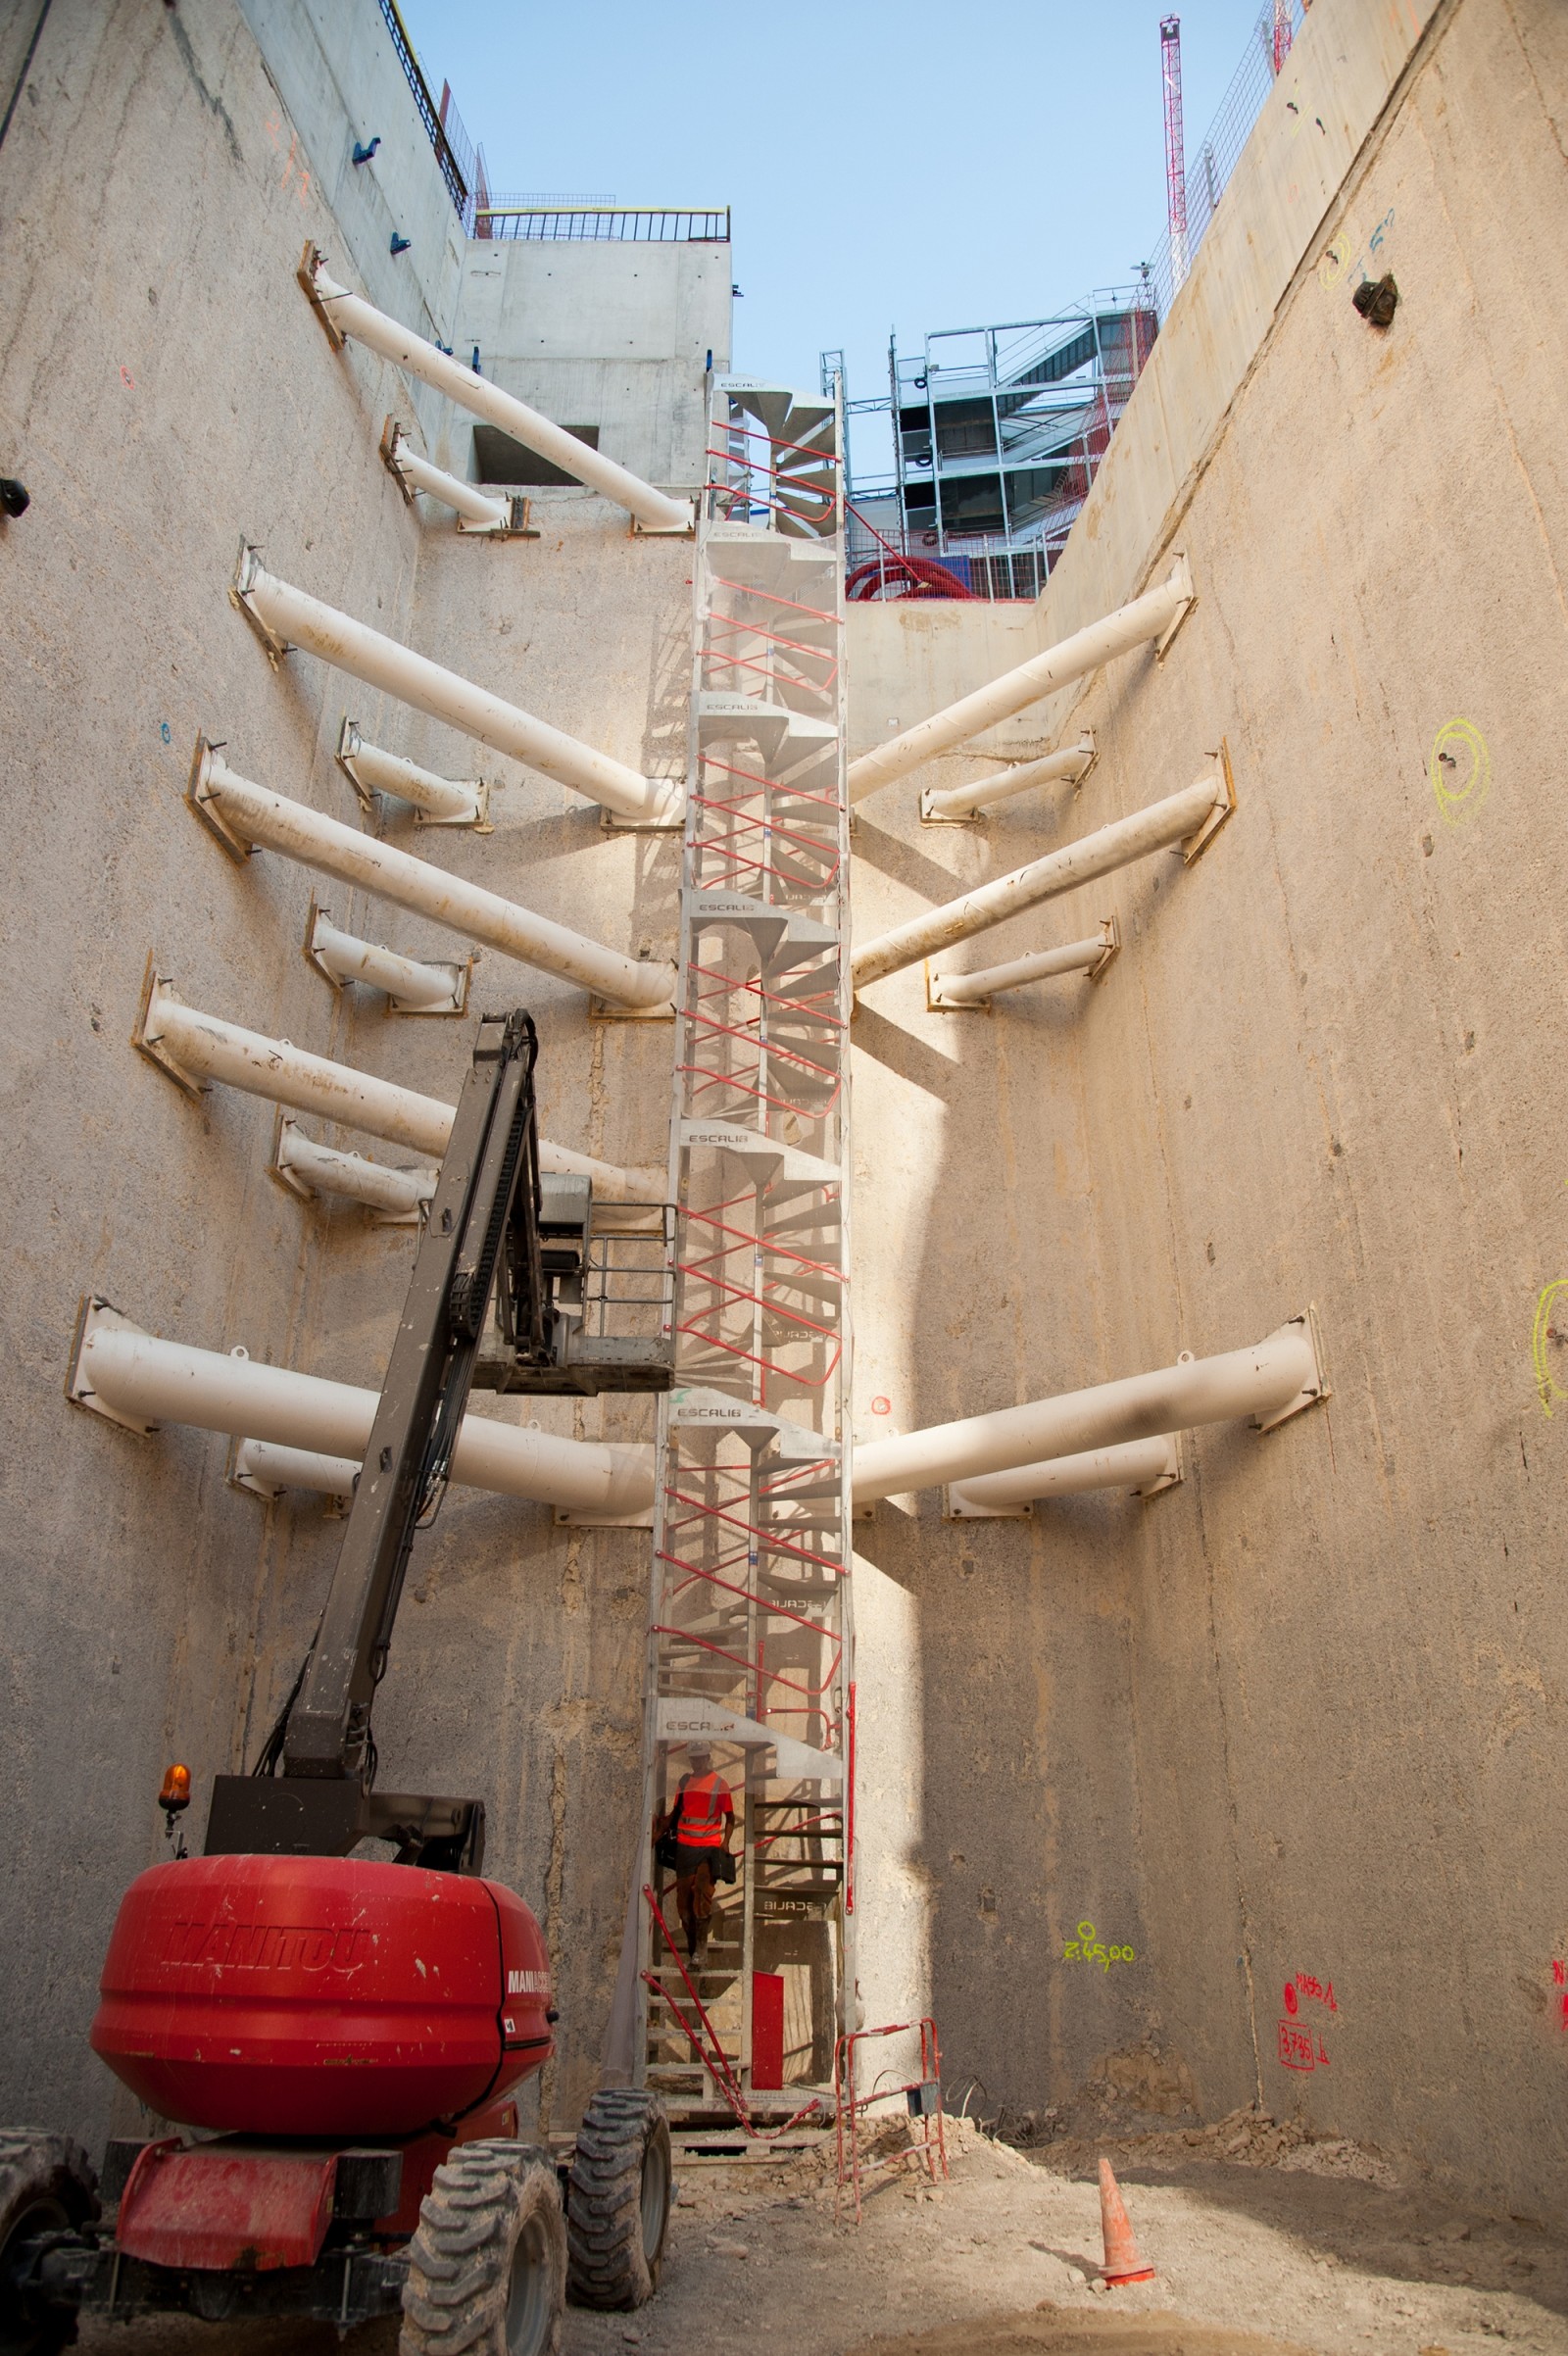 July 2019 - Buton on diaphragm wall seen from below